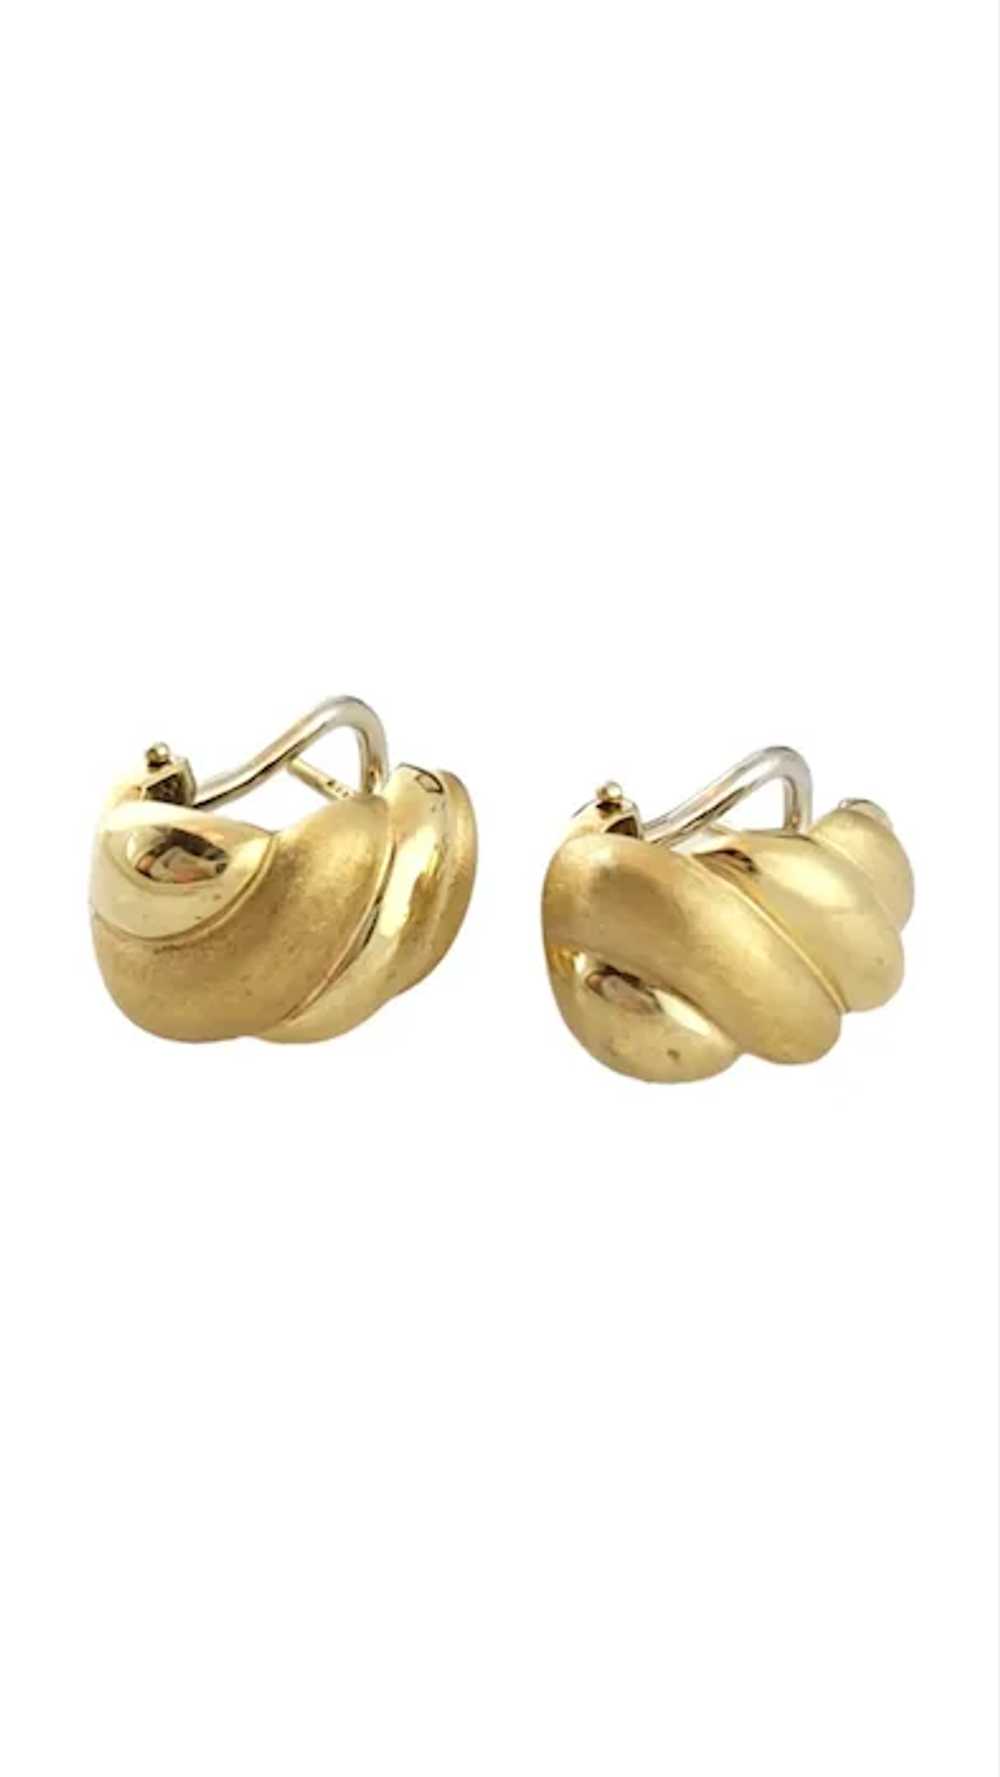 Vintage 14K Yellow Gold Twisted Cuff Earrings - image 2